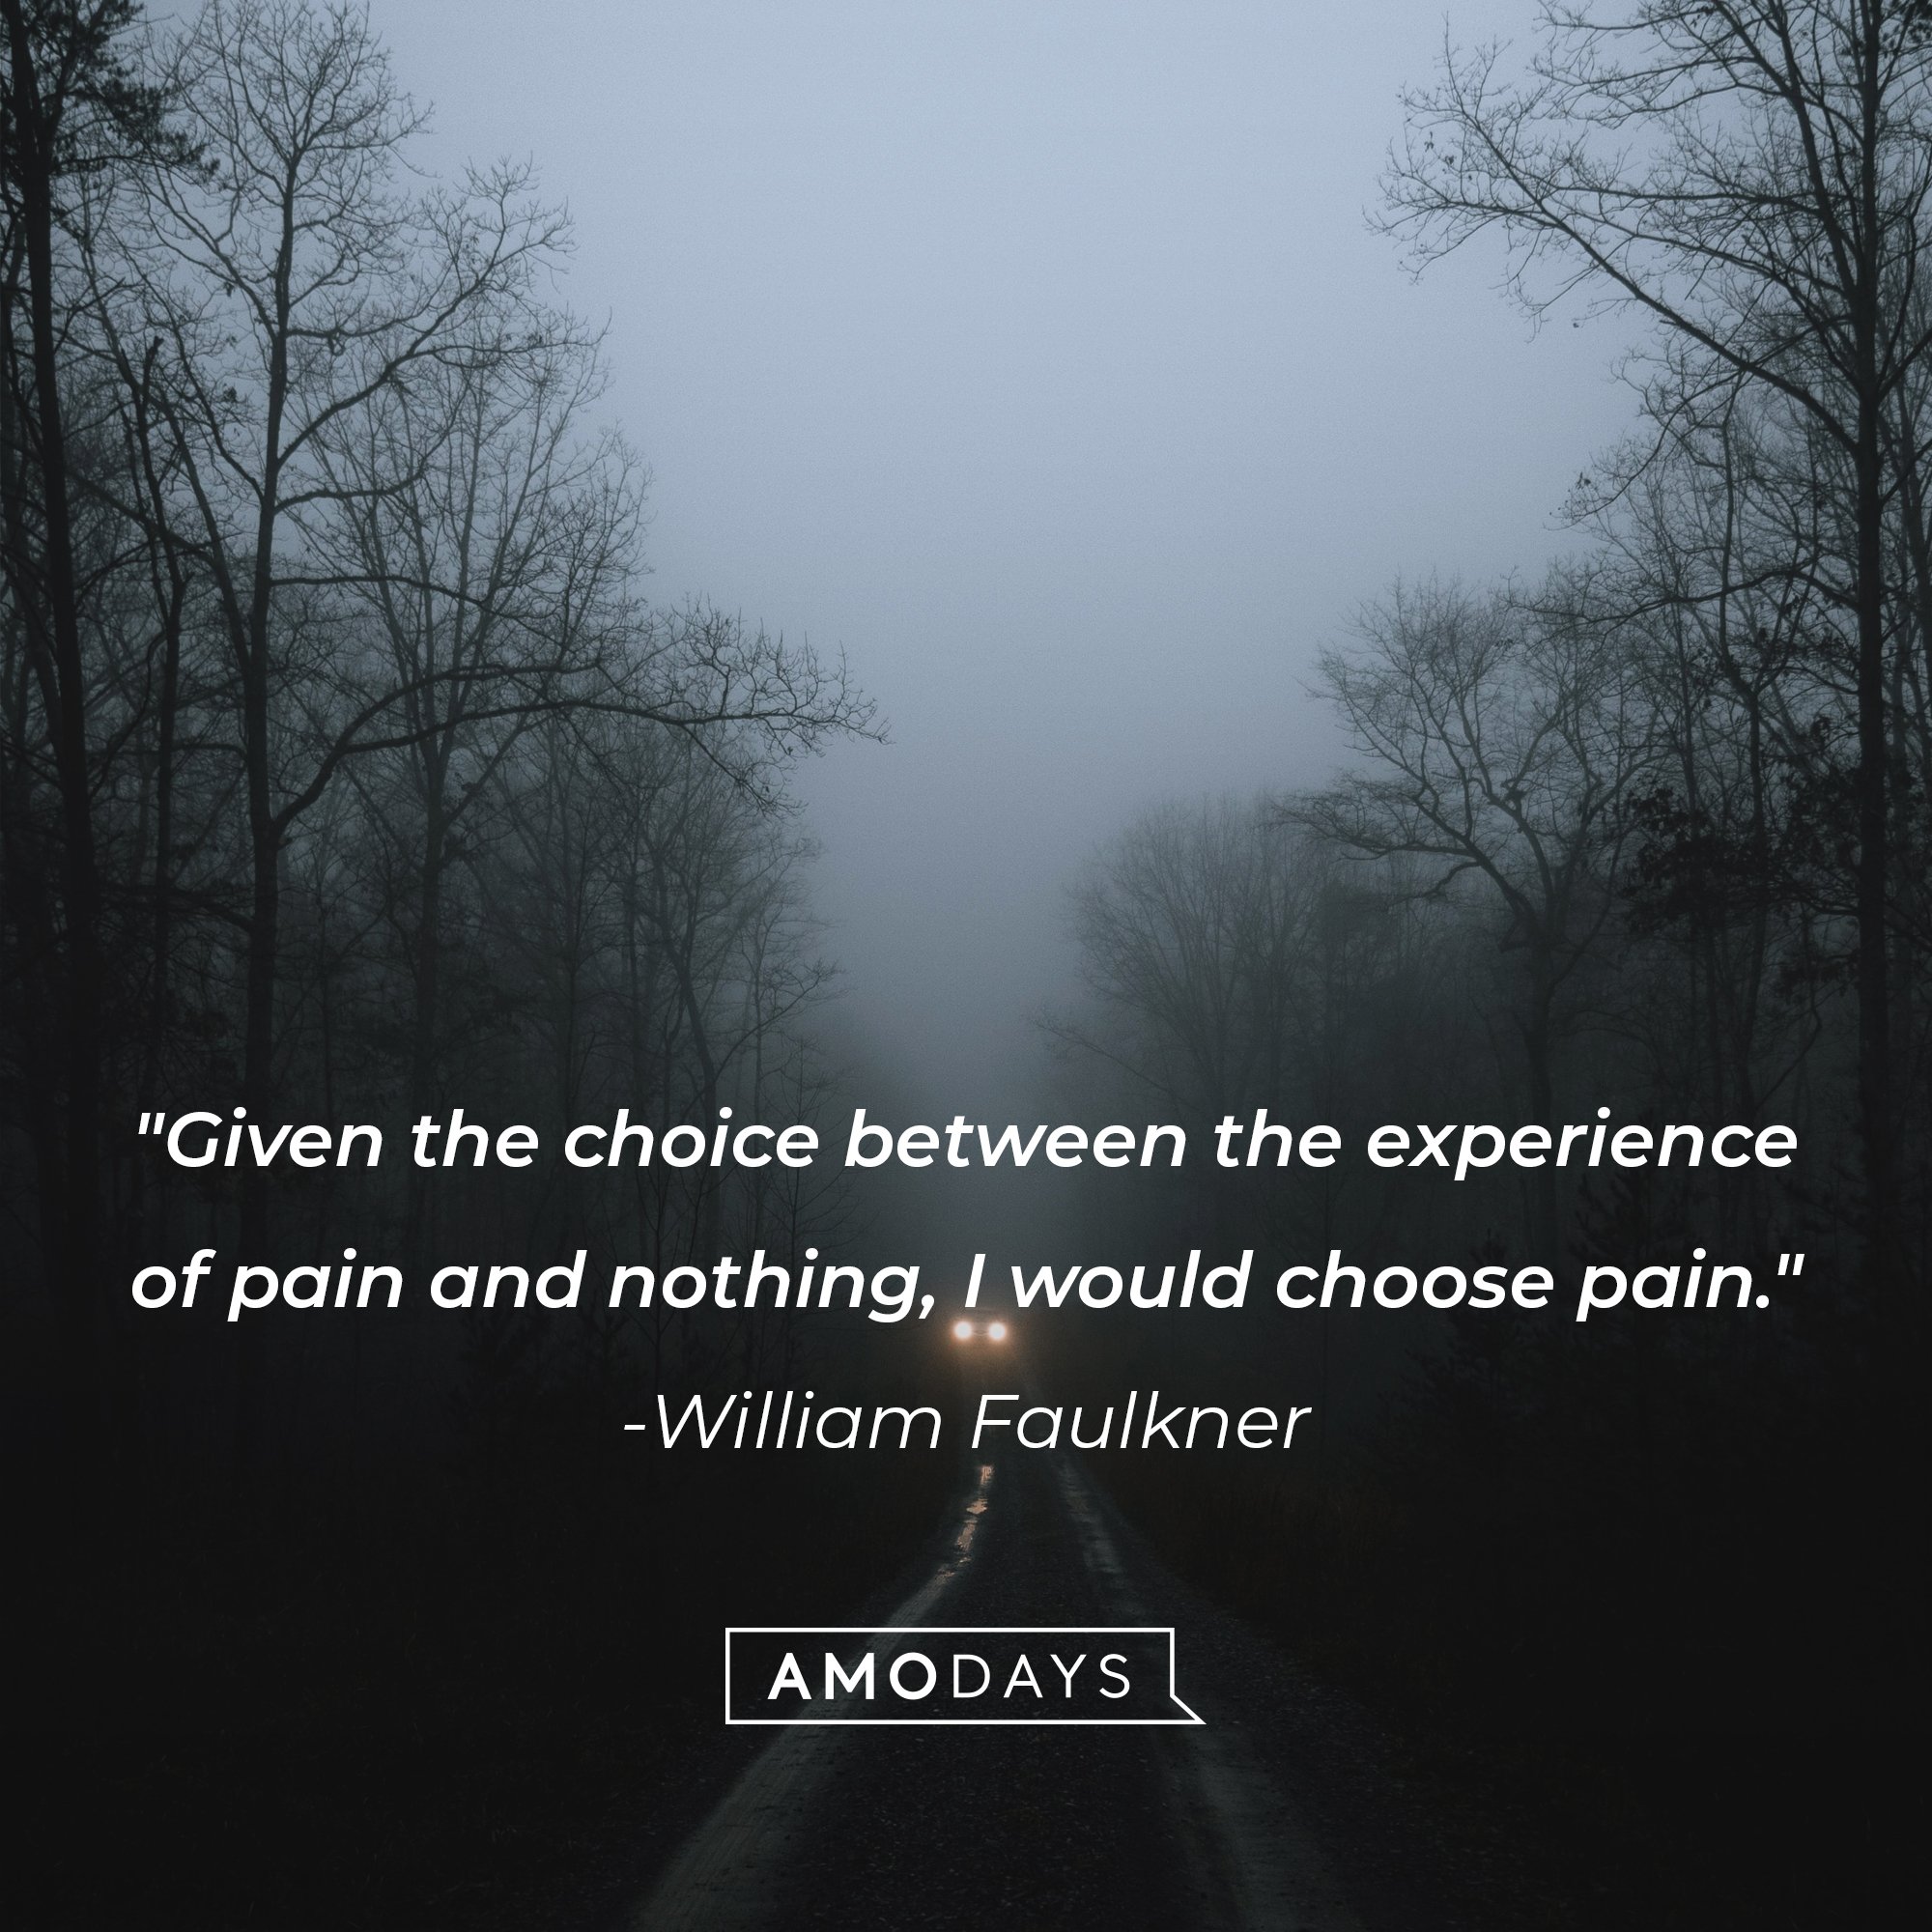  William Faulkner’s quote: "Given the choice between the experience of pain and nothing, I would choose pain." | Image: AmoDays 